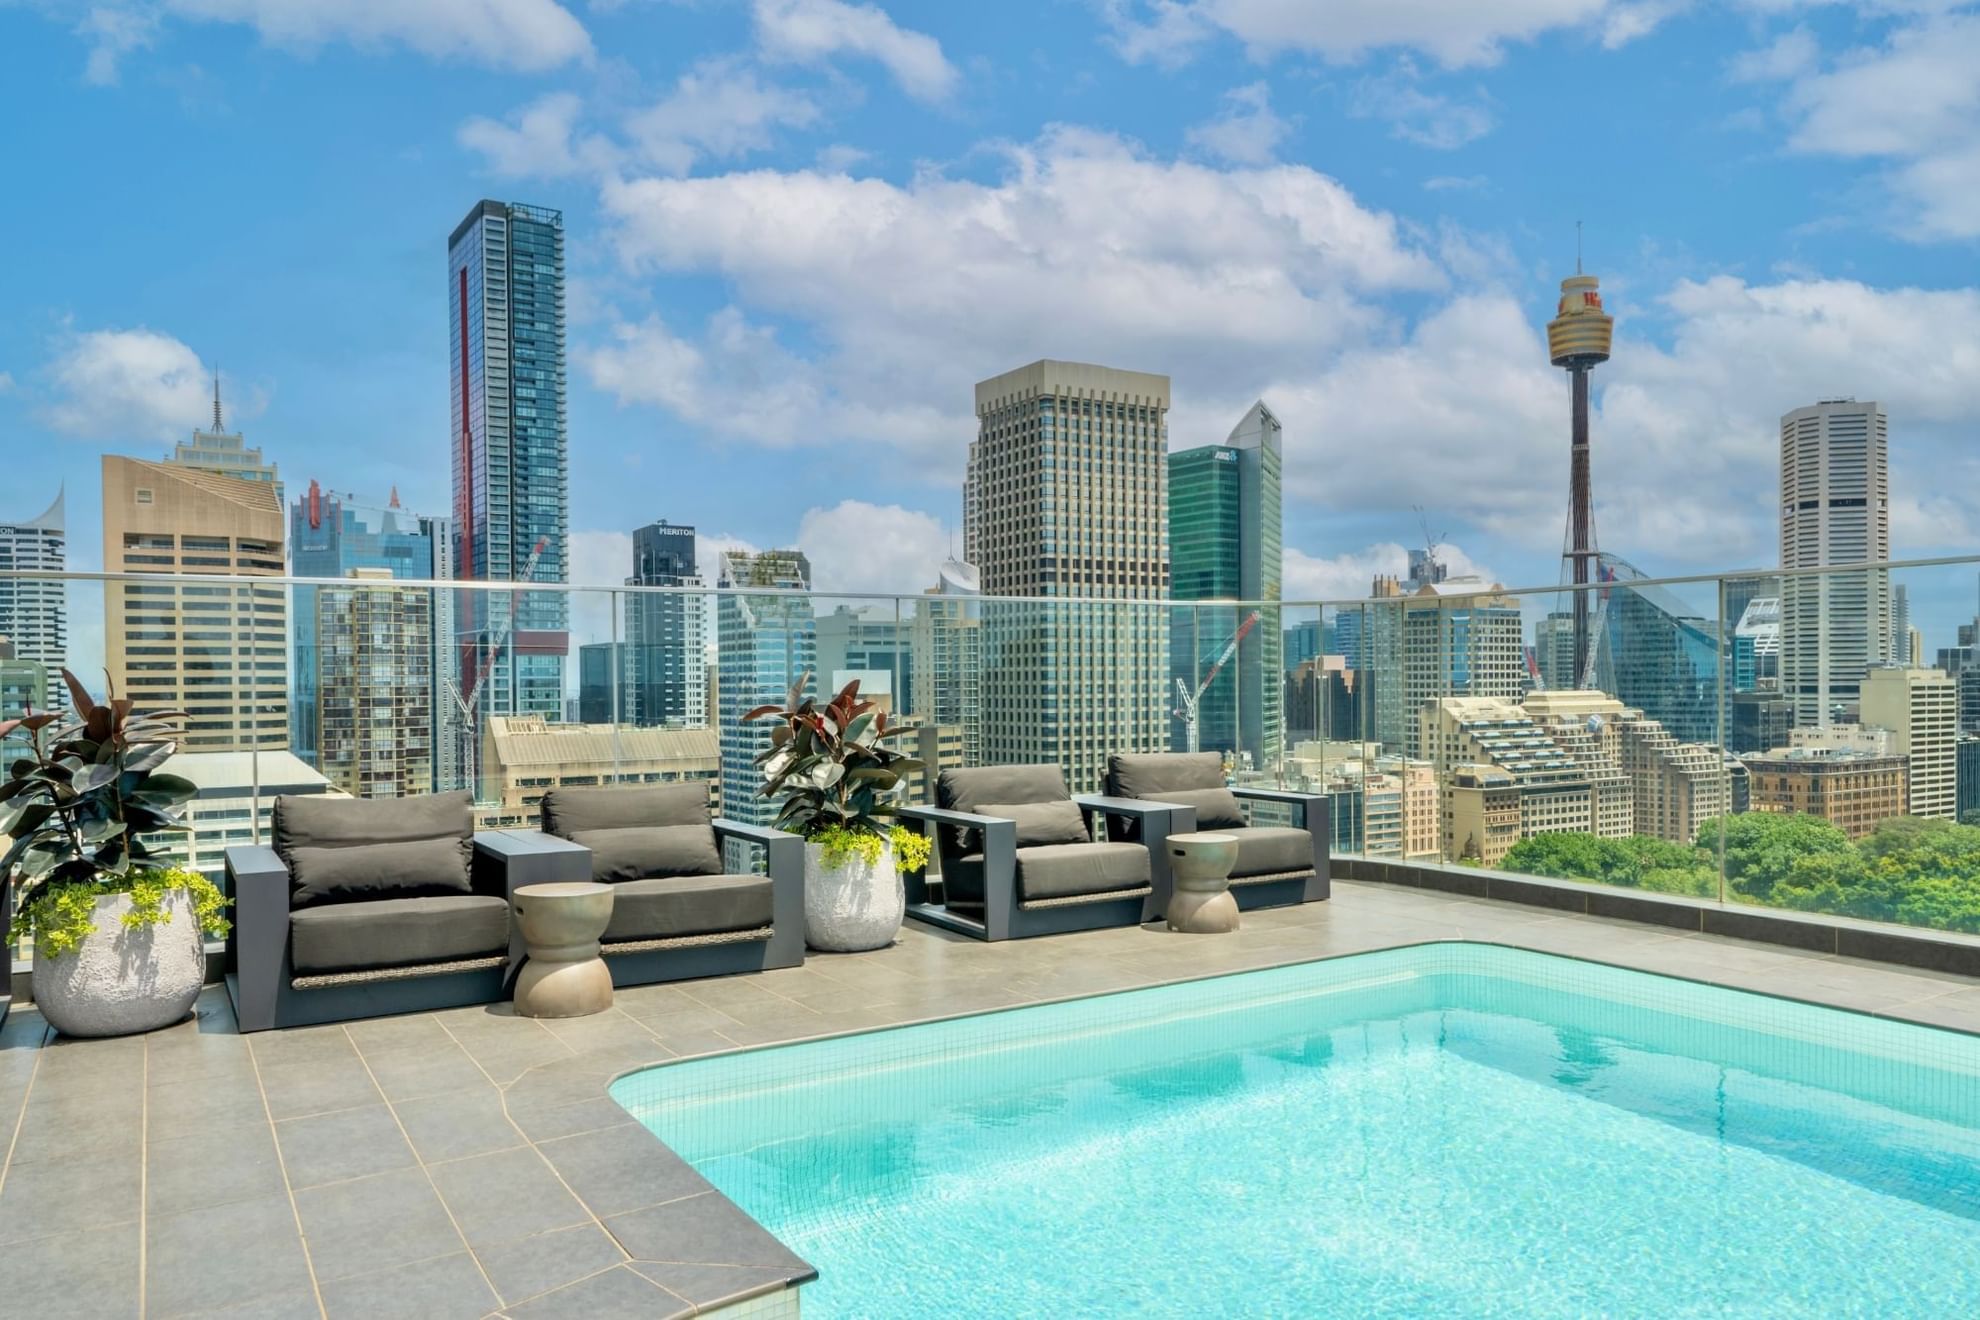 Rooftop pool area & loungers with a city view at Pullman Sydney Hyde Park